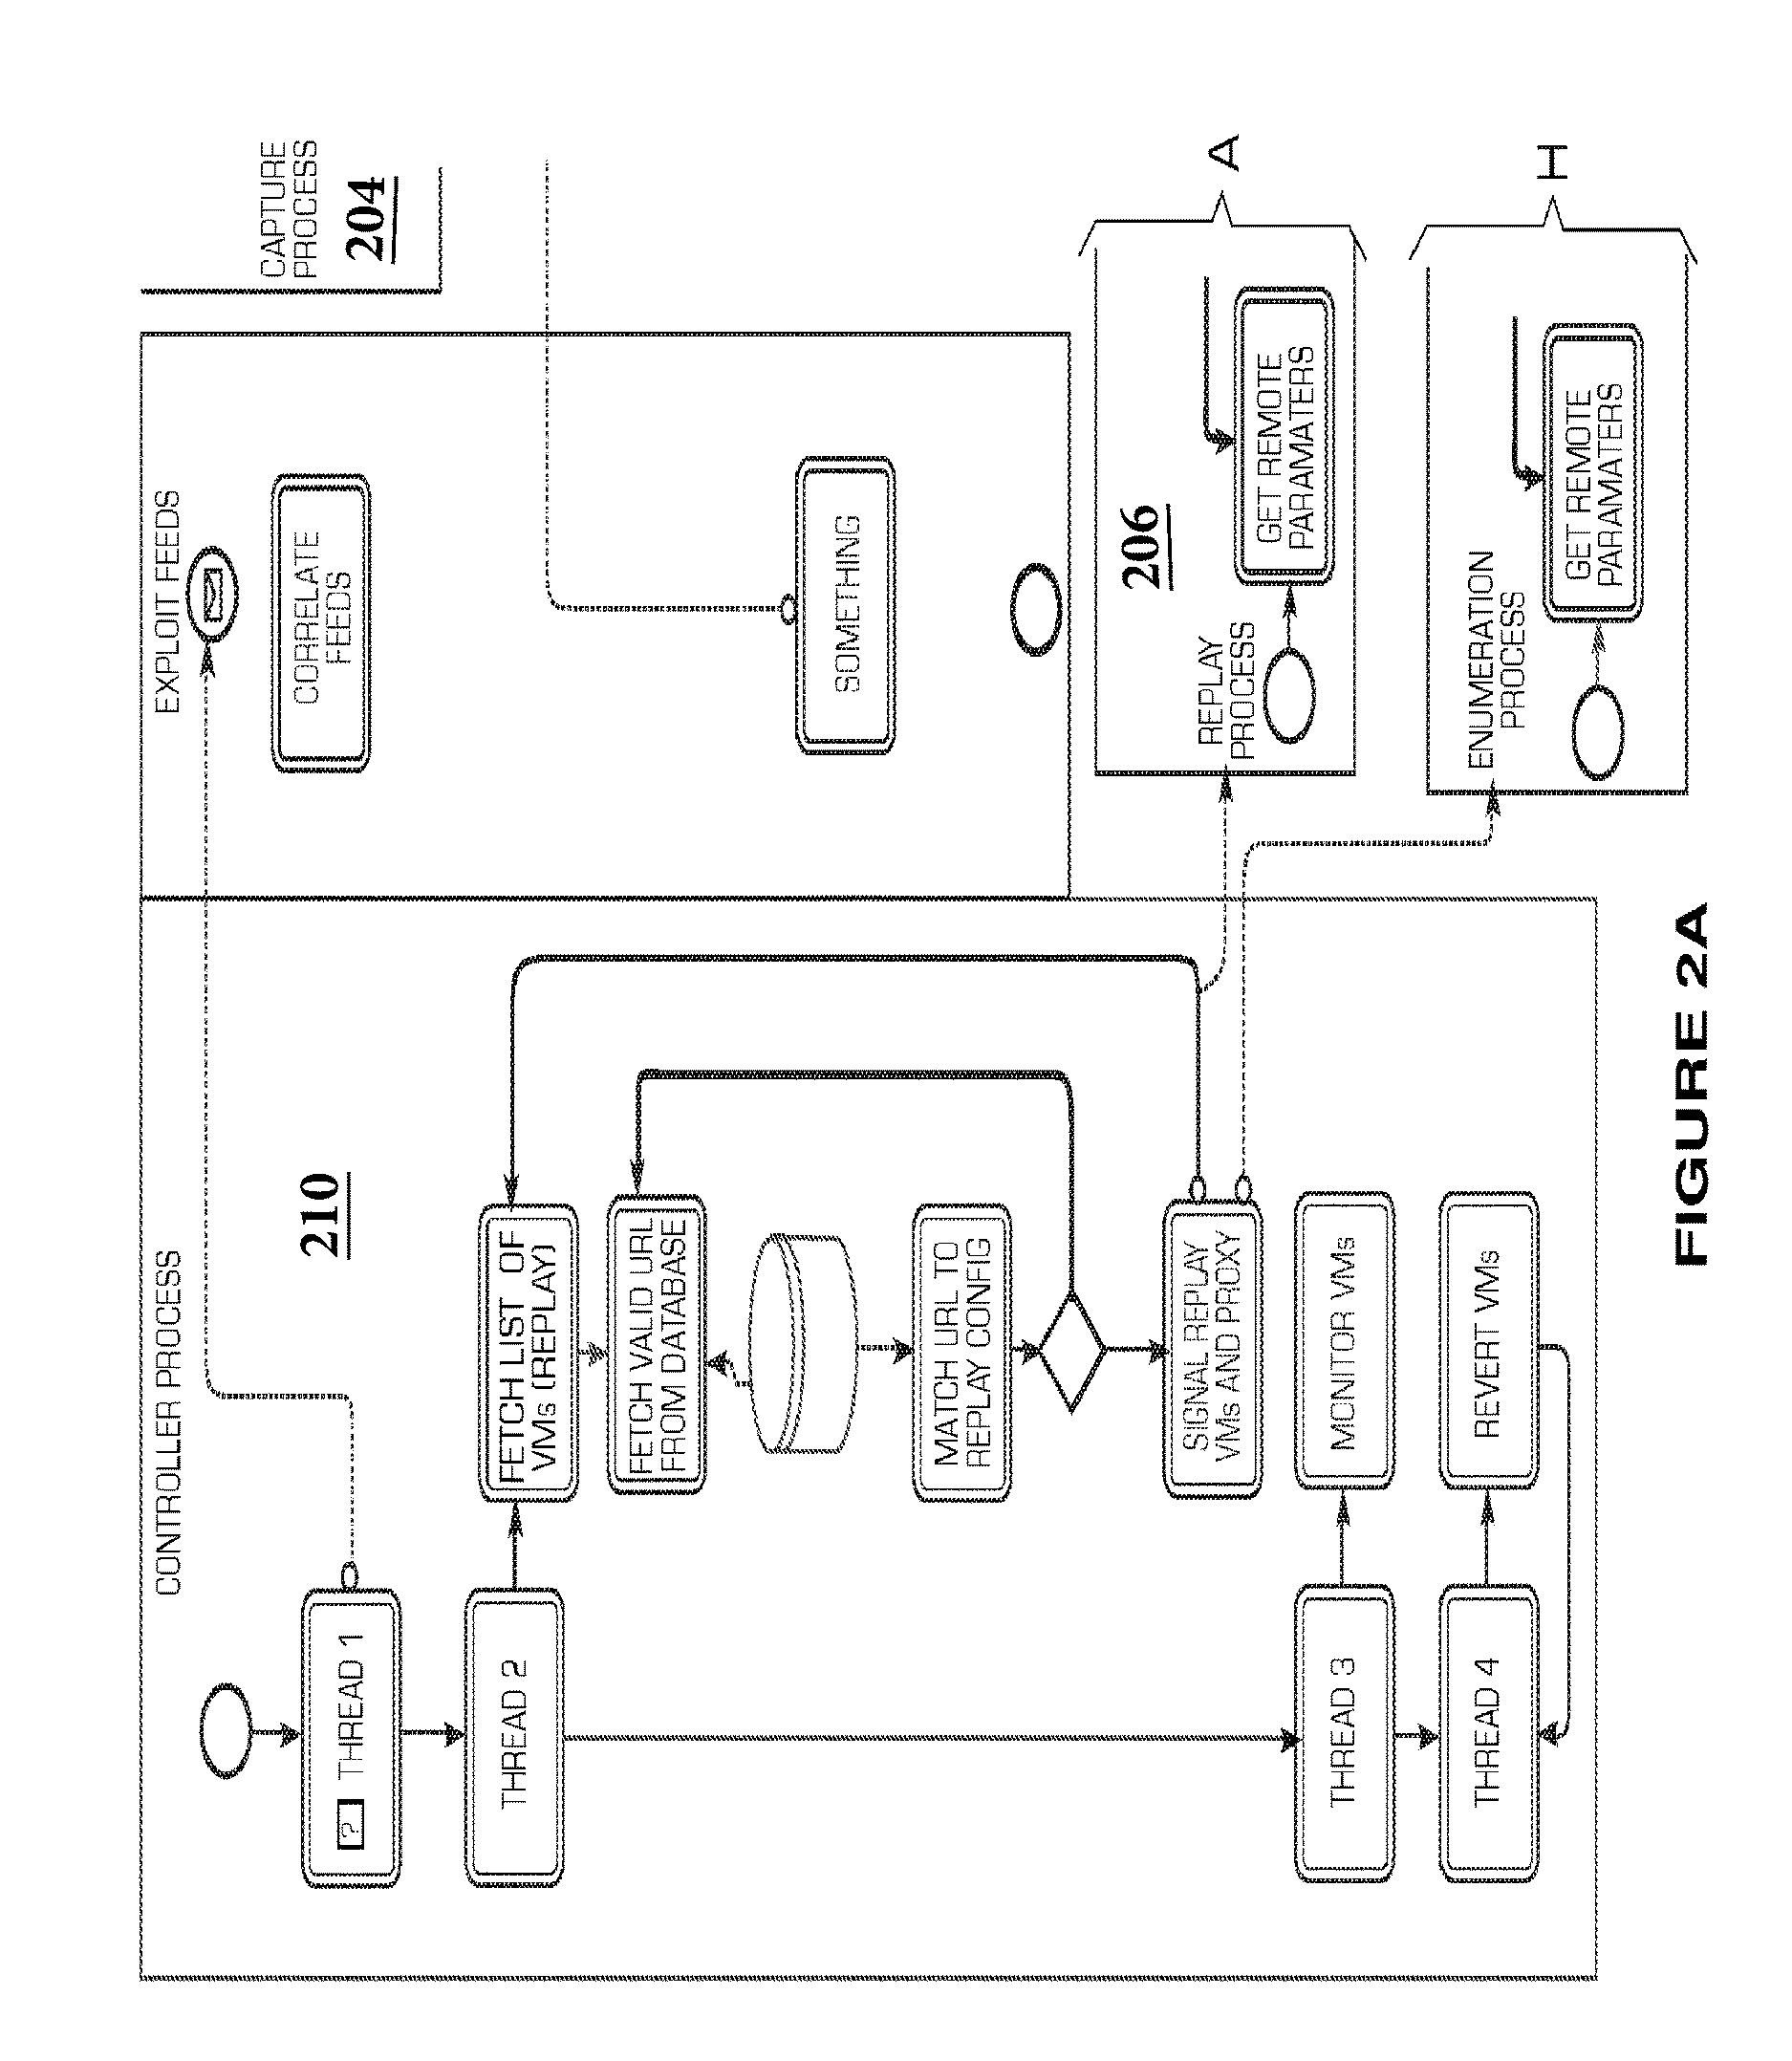 Malware and exploit campaign detection system and method